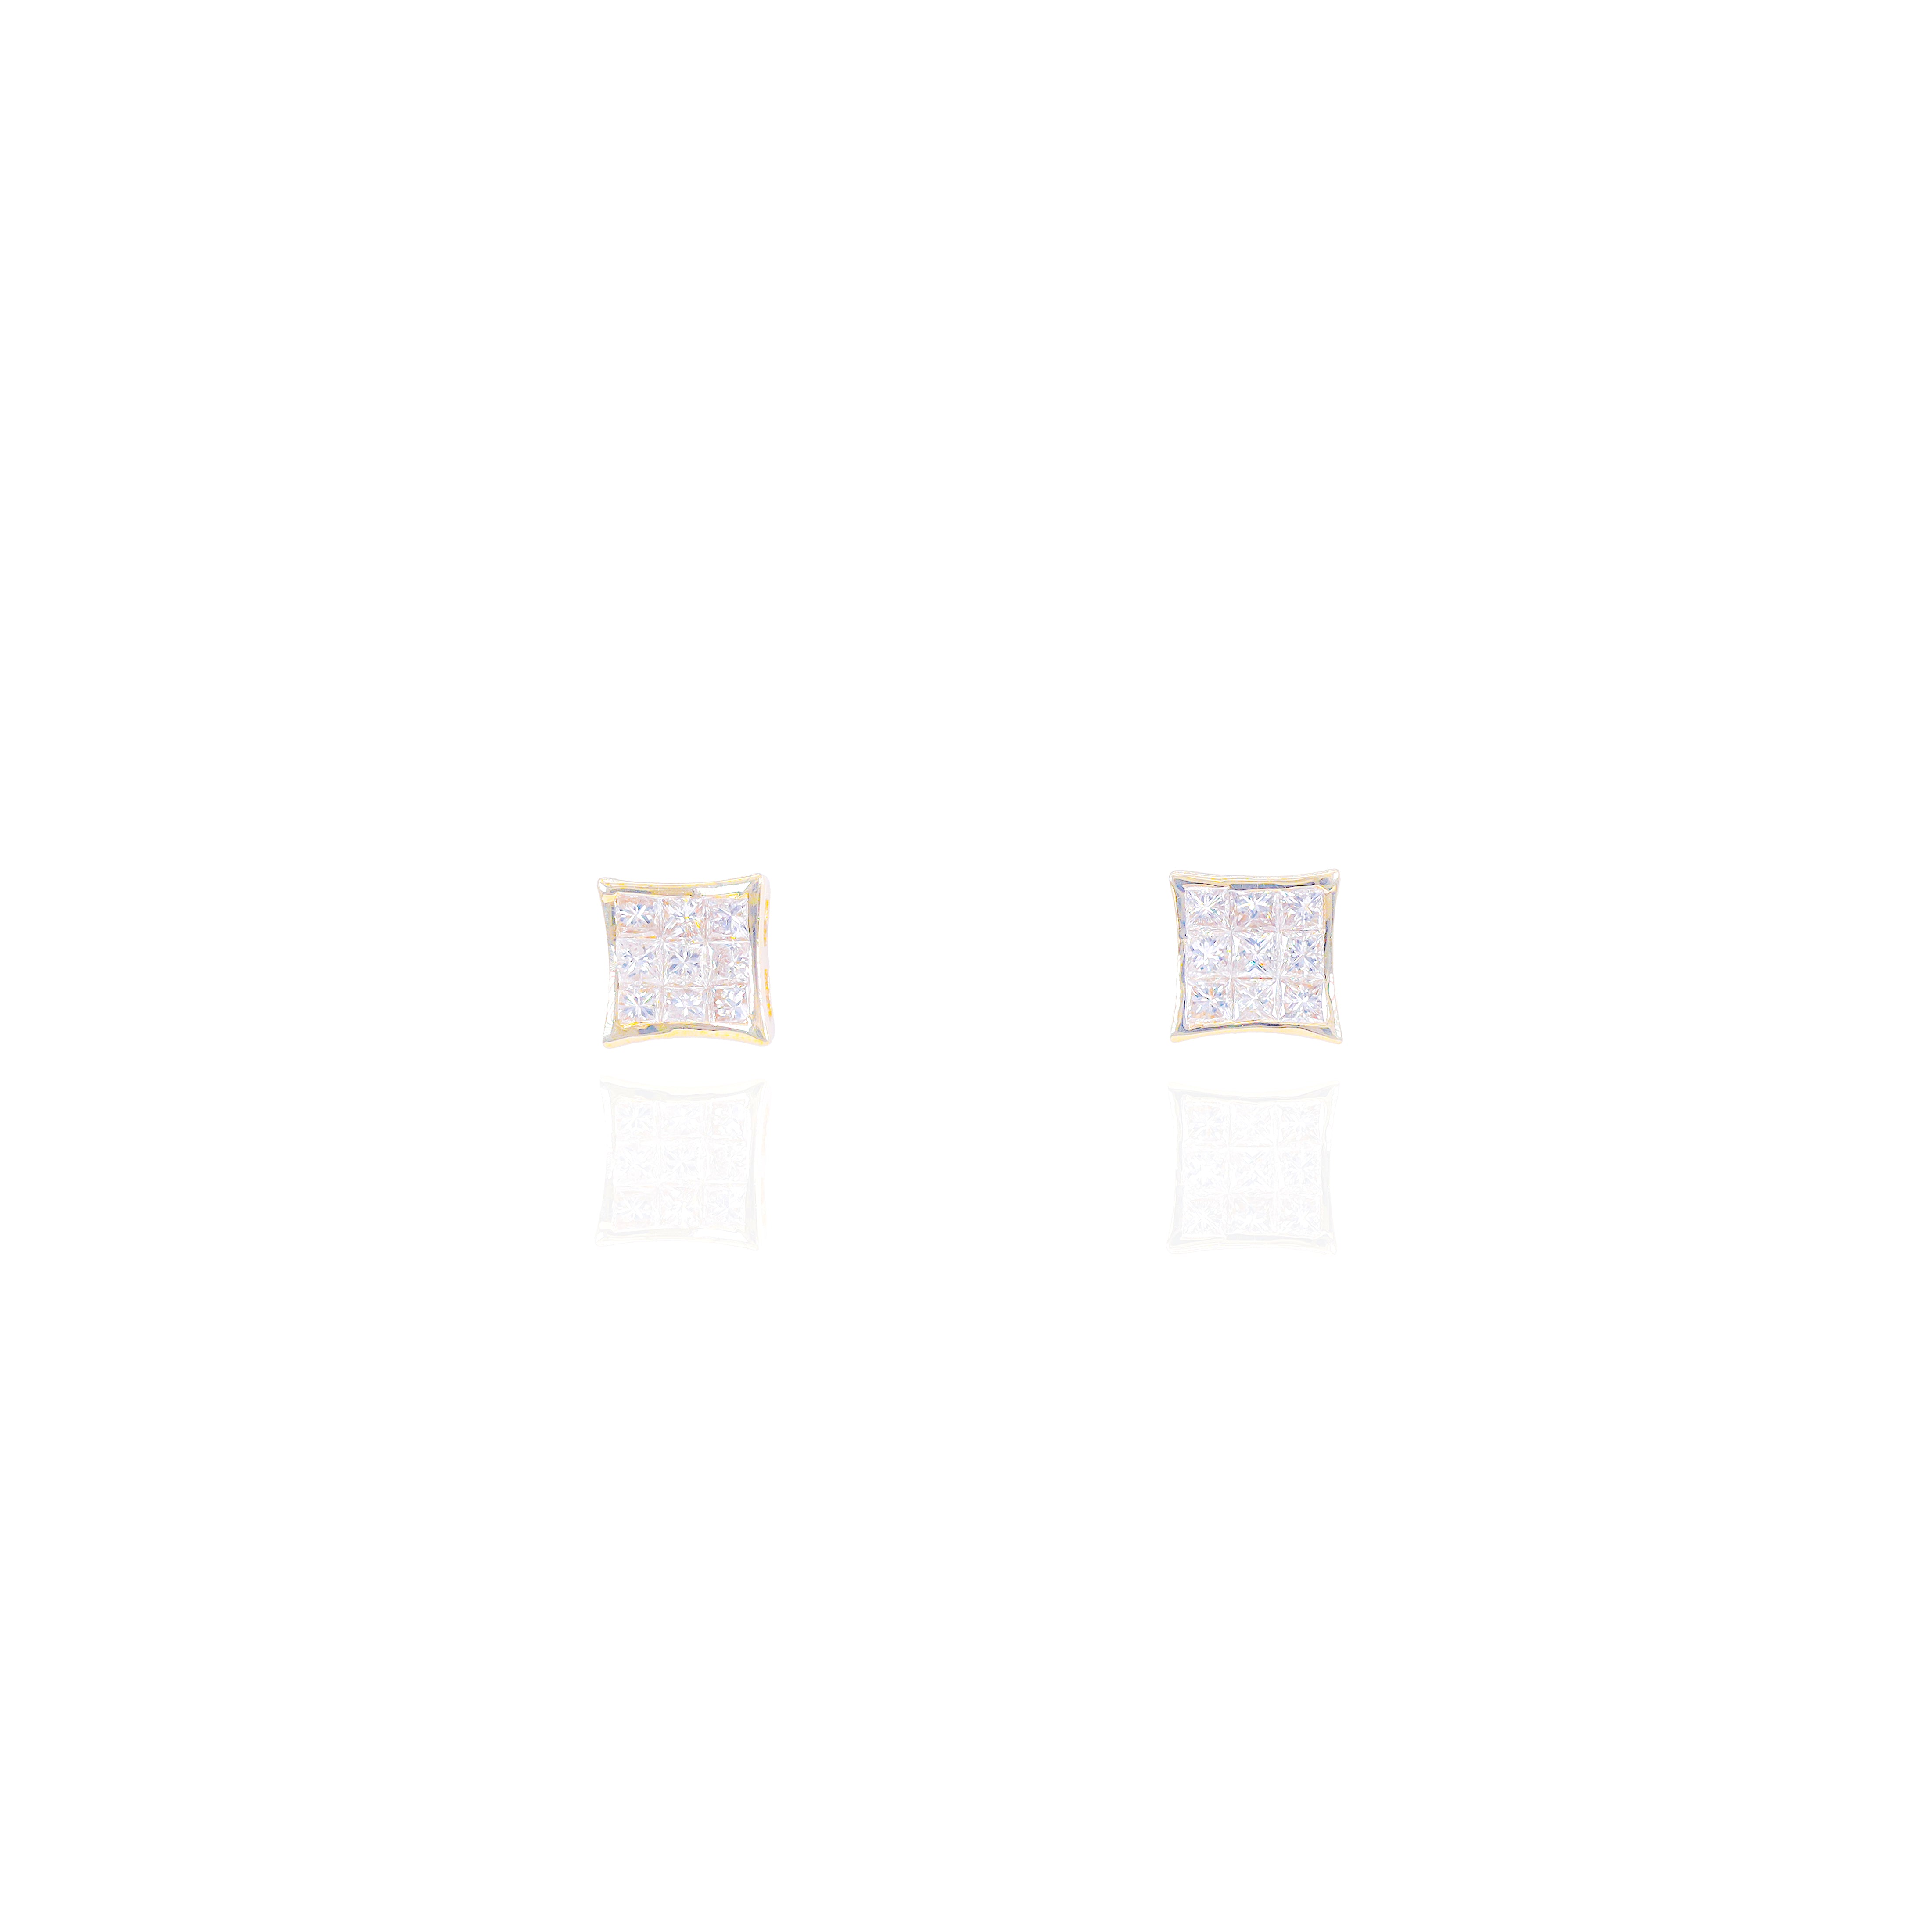 Invisible Set Princess Cut Diamond Earrings with Pointed Corners